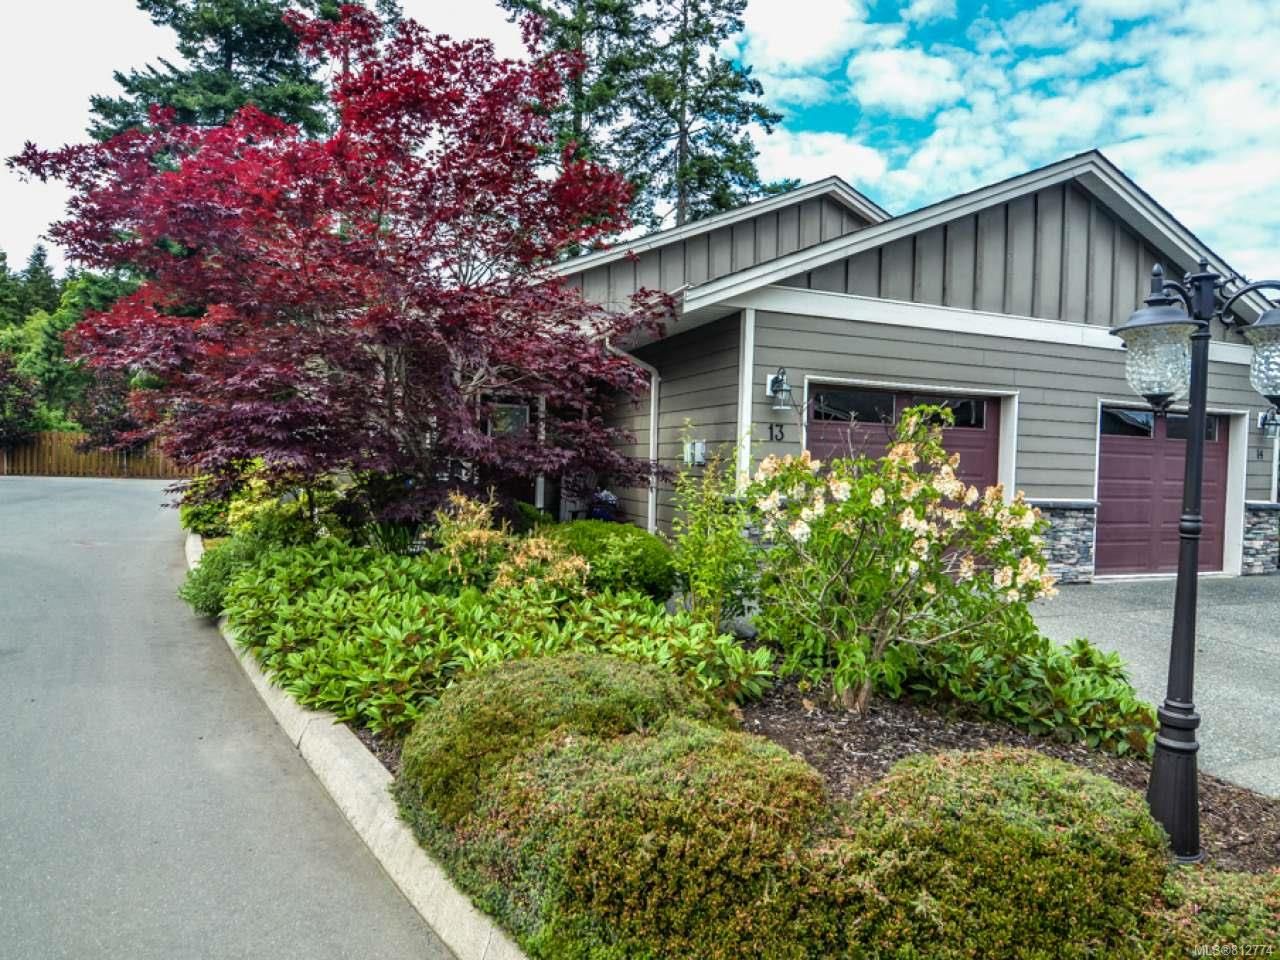 Main Photo: 13 346 Erickson Rd in CAMPBELL RIVER: CR Willow Point Row/Townhouse for sale (Campbell River)  : MLS®# 812774